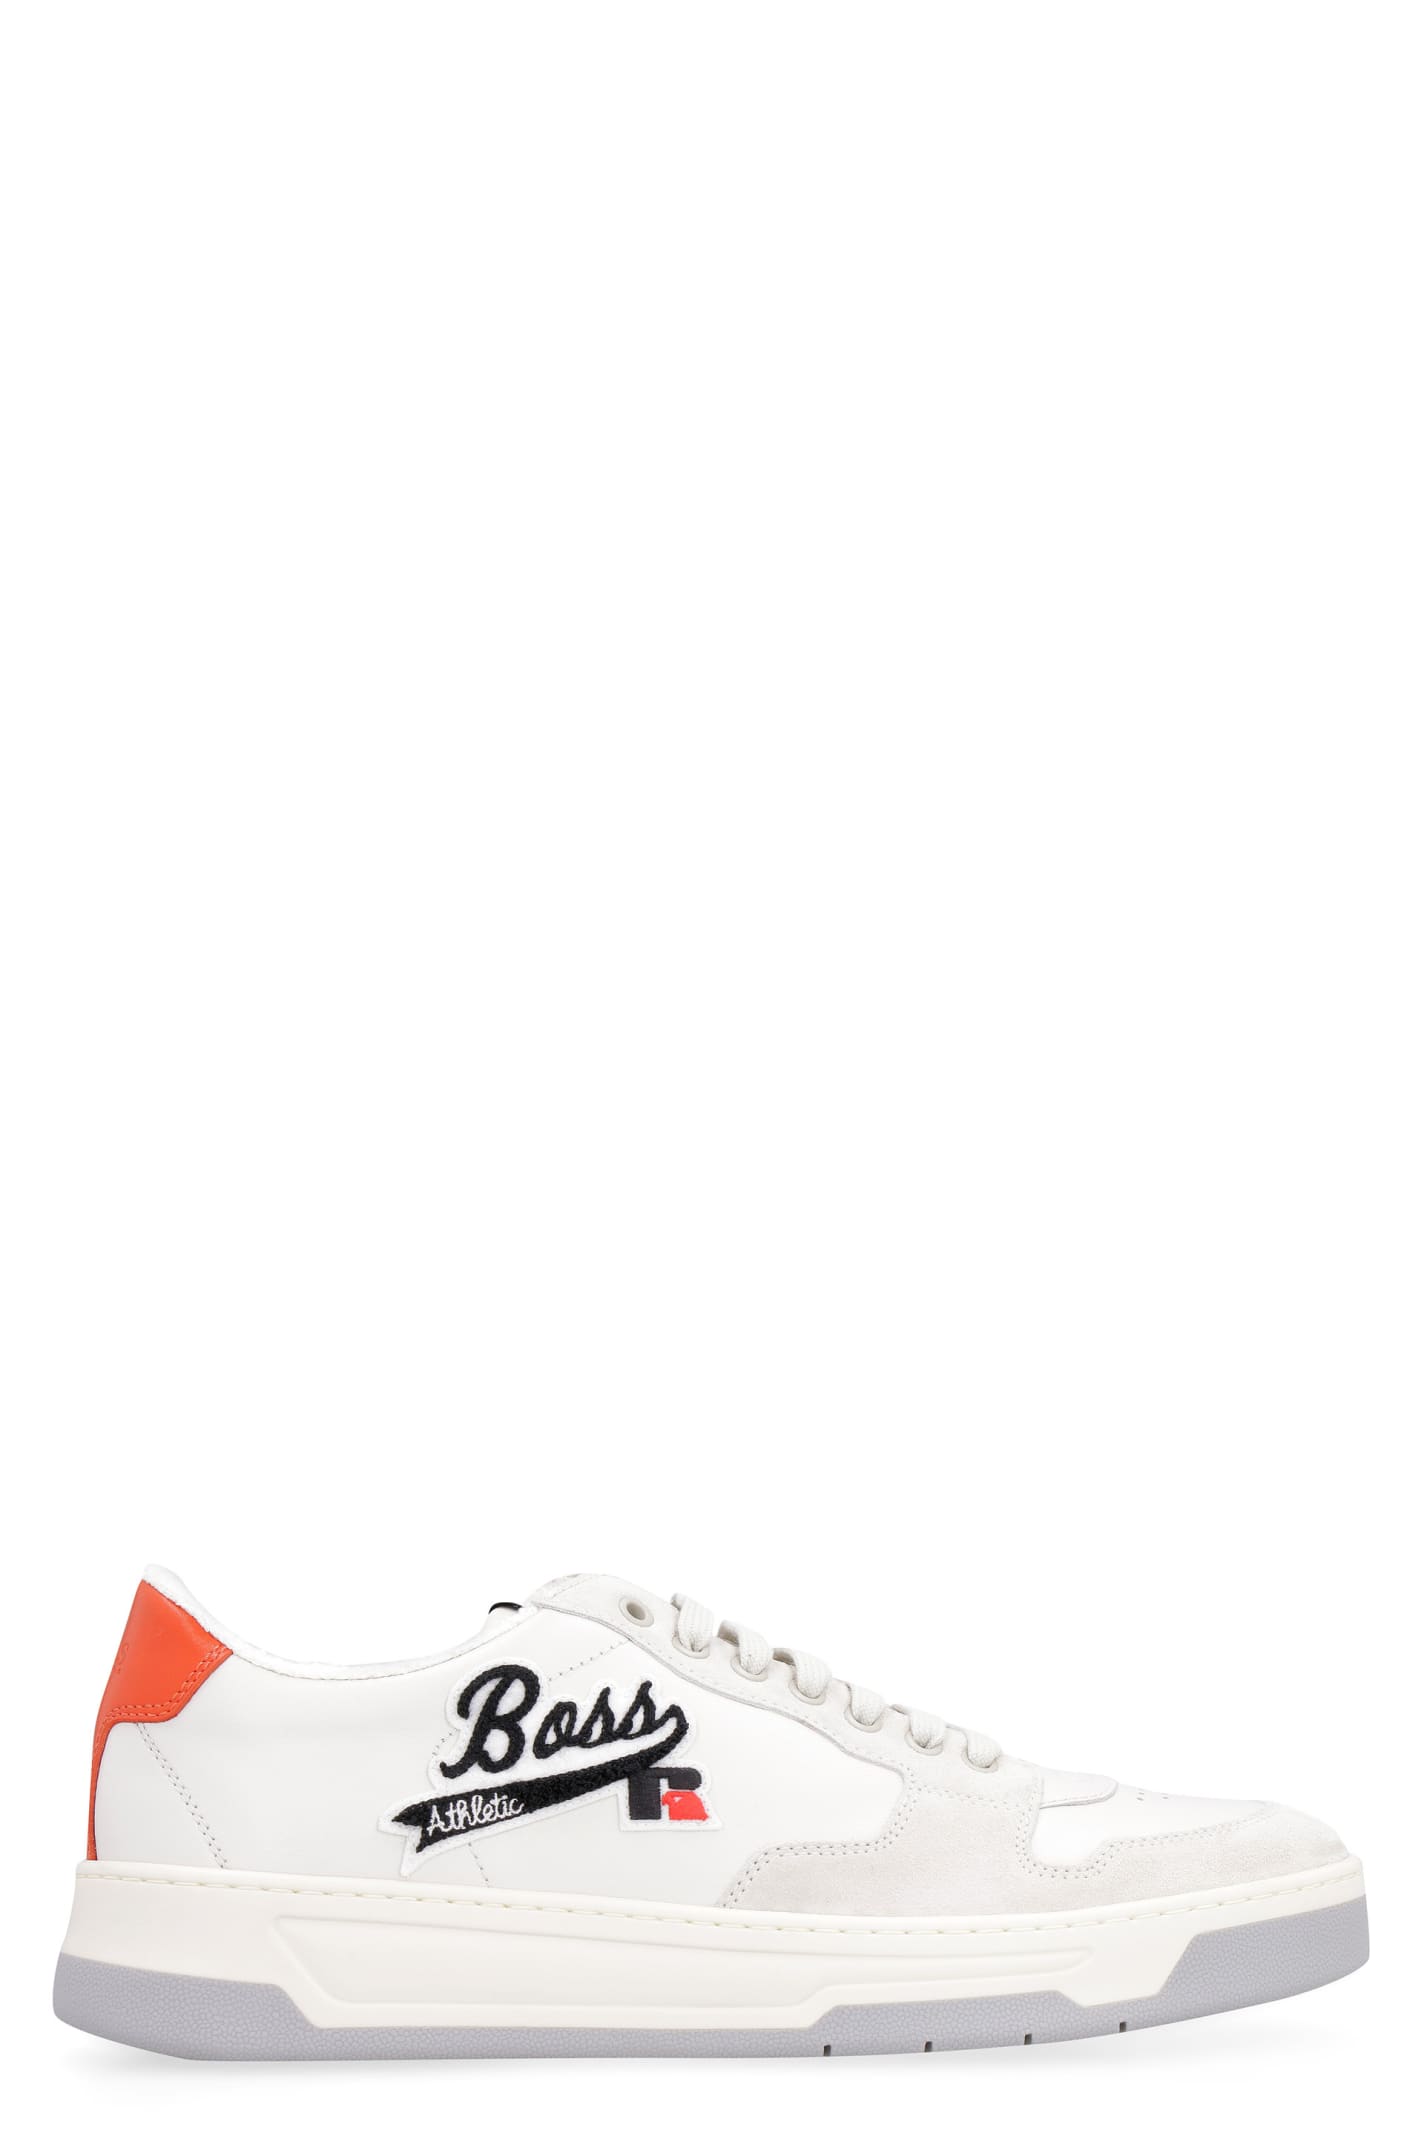 Hugo Boss Boss X Russell Athletic - Baltimore Leather Low-top Sneakers